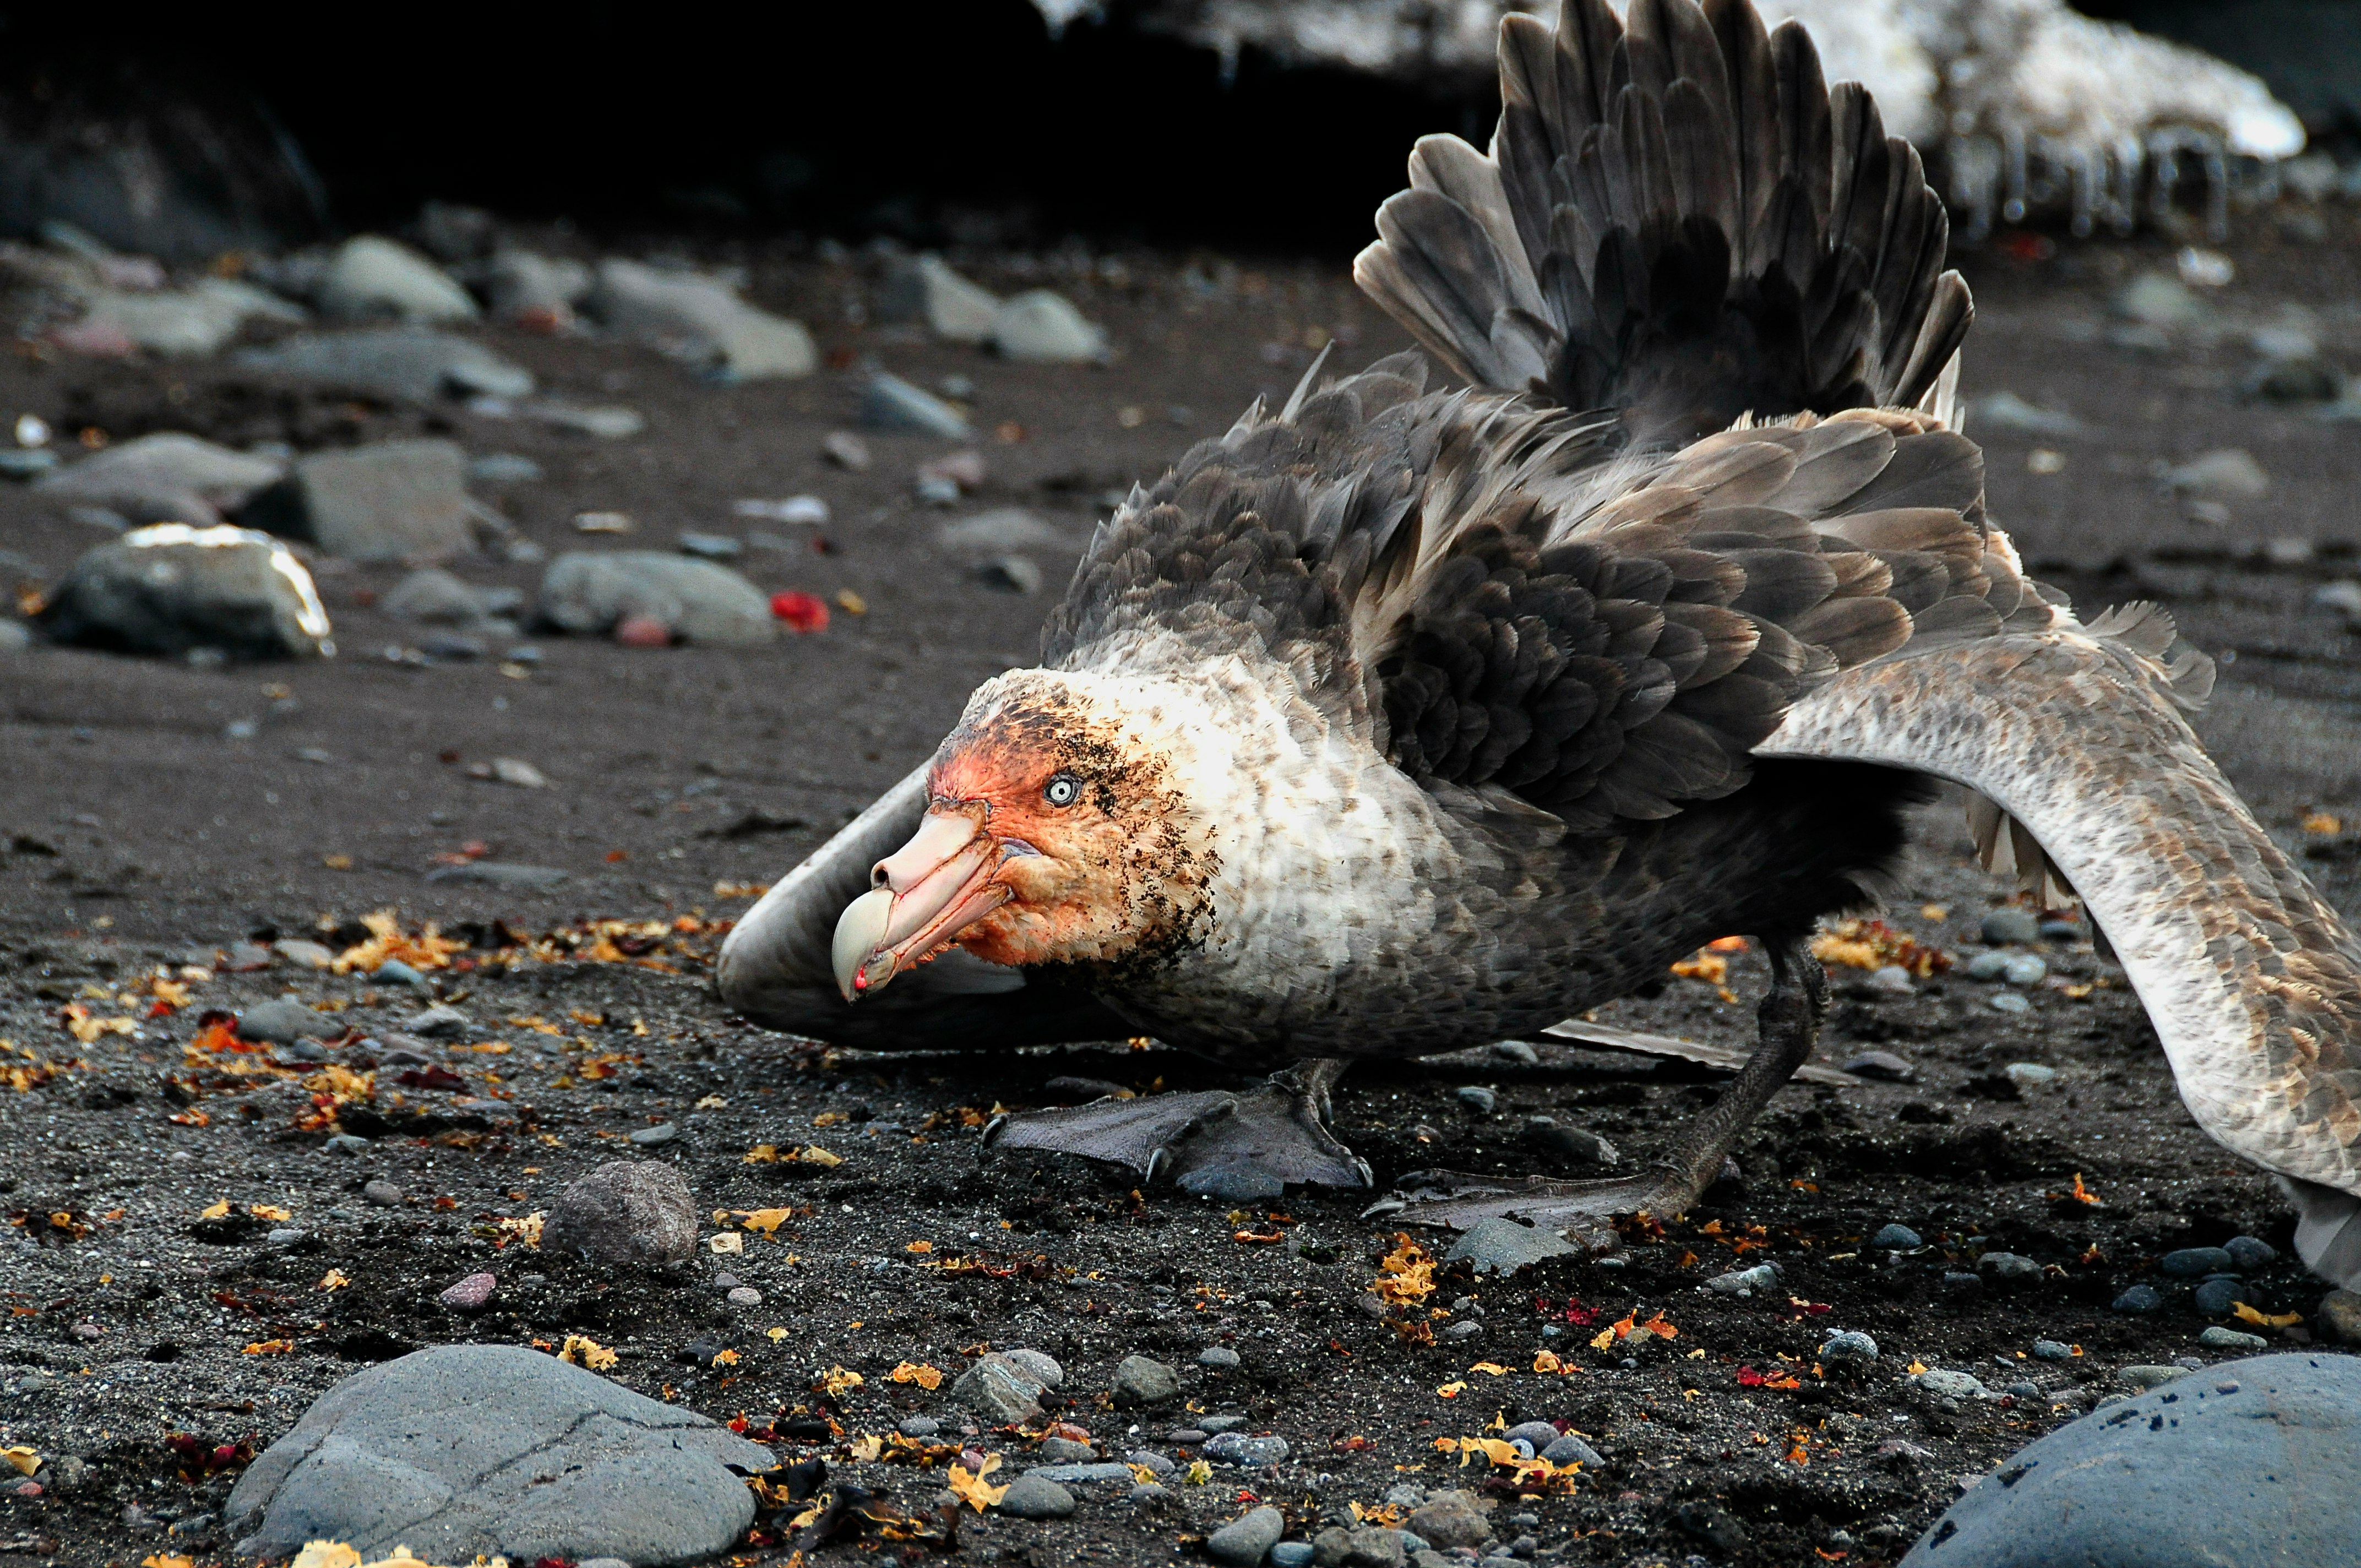 A southern giant petrel uses the posture known as the seal master posture- wings outstretched, tail raise and beak pointed at the enemy - to guard its meal from an intruder. 